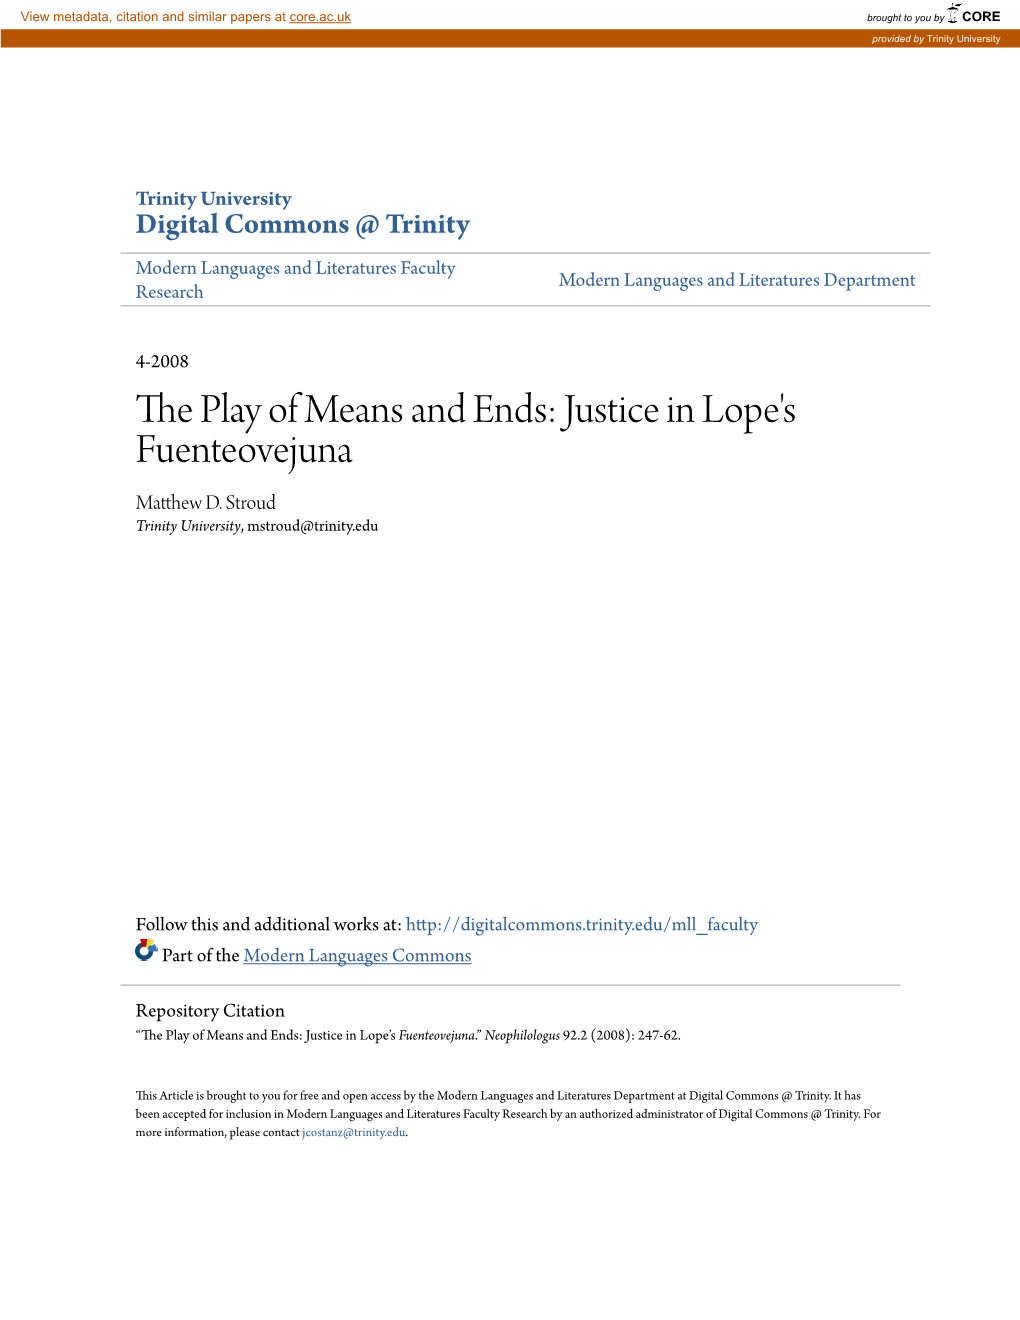 The Play of Means and Ends: Justice in Lope's Fuenteovejuna